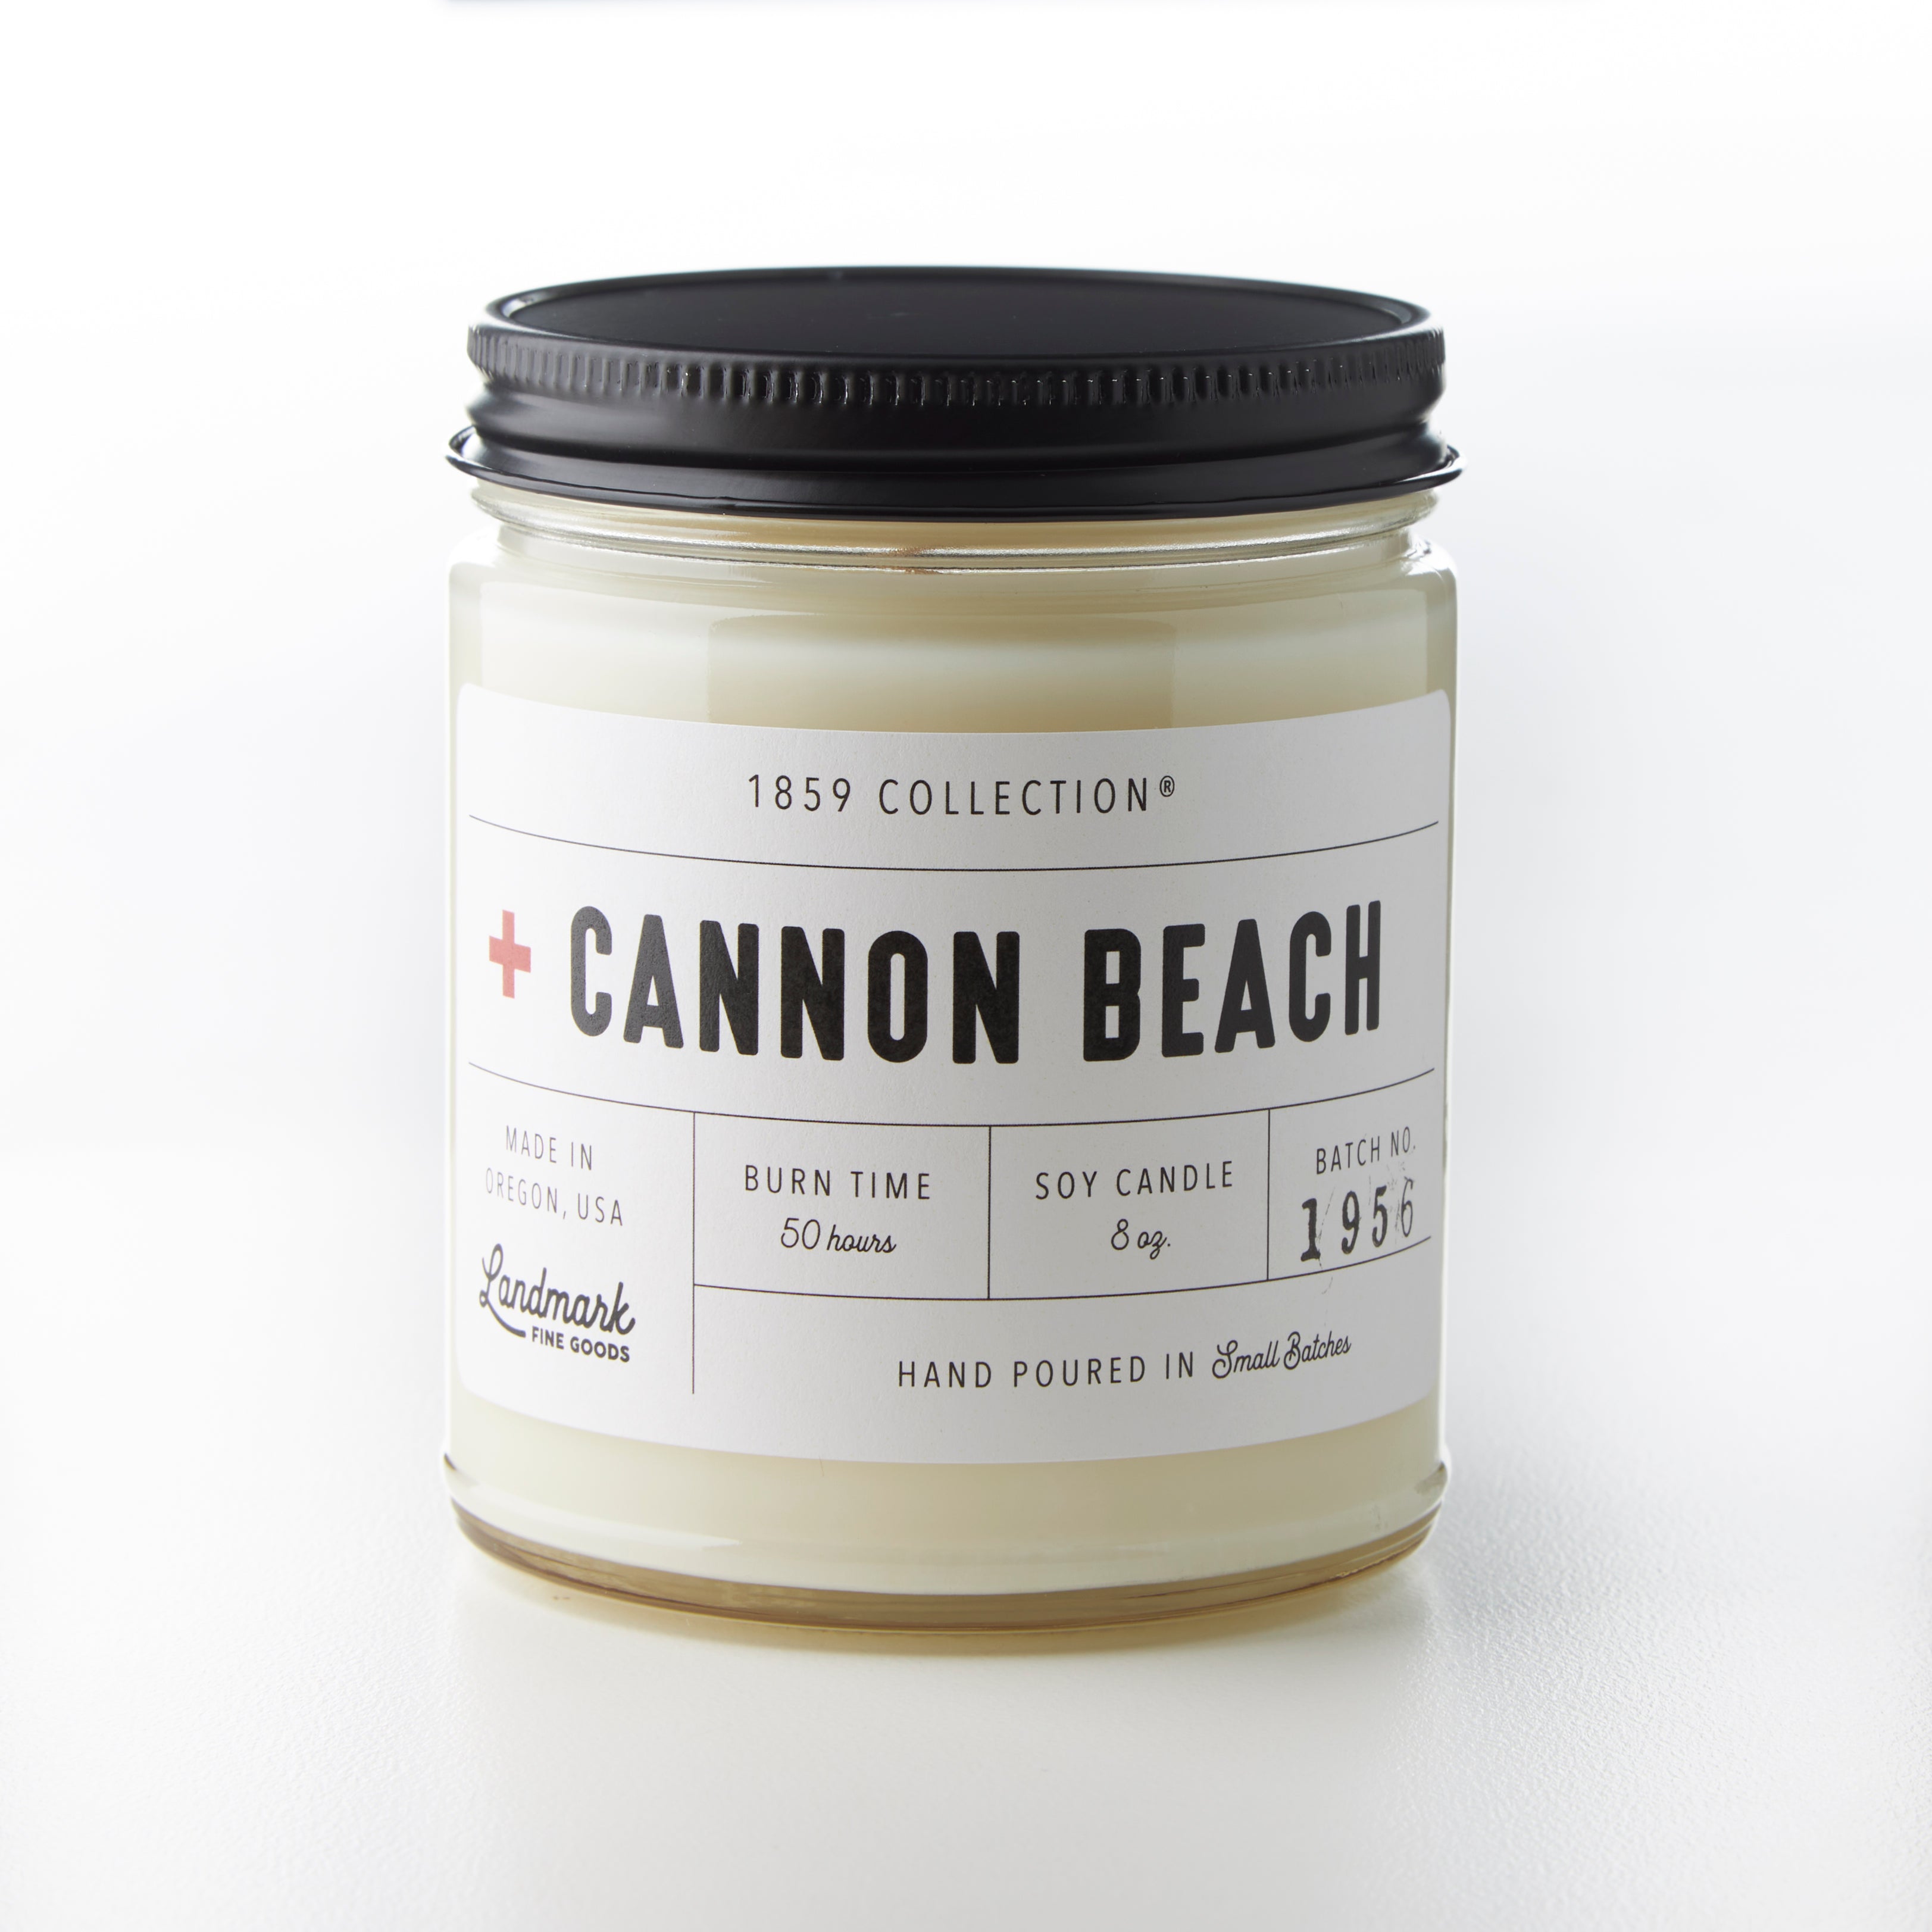 Cannon Beach Candle - 1859 Collection®